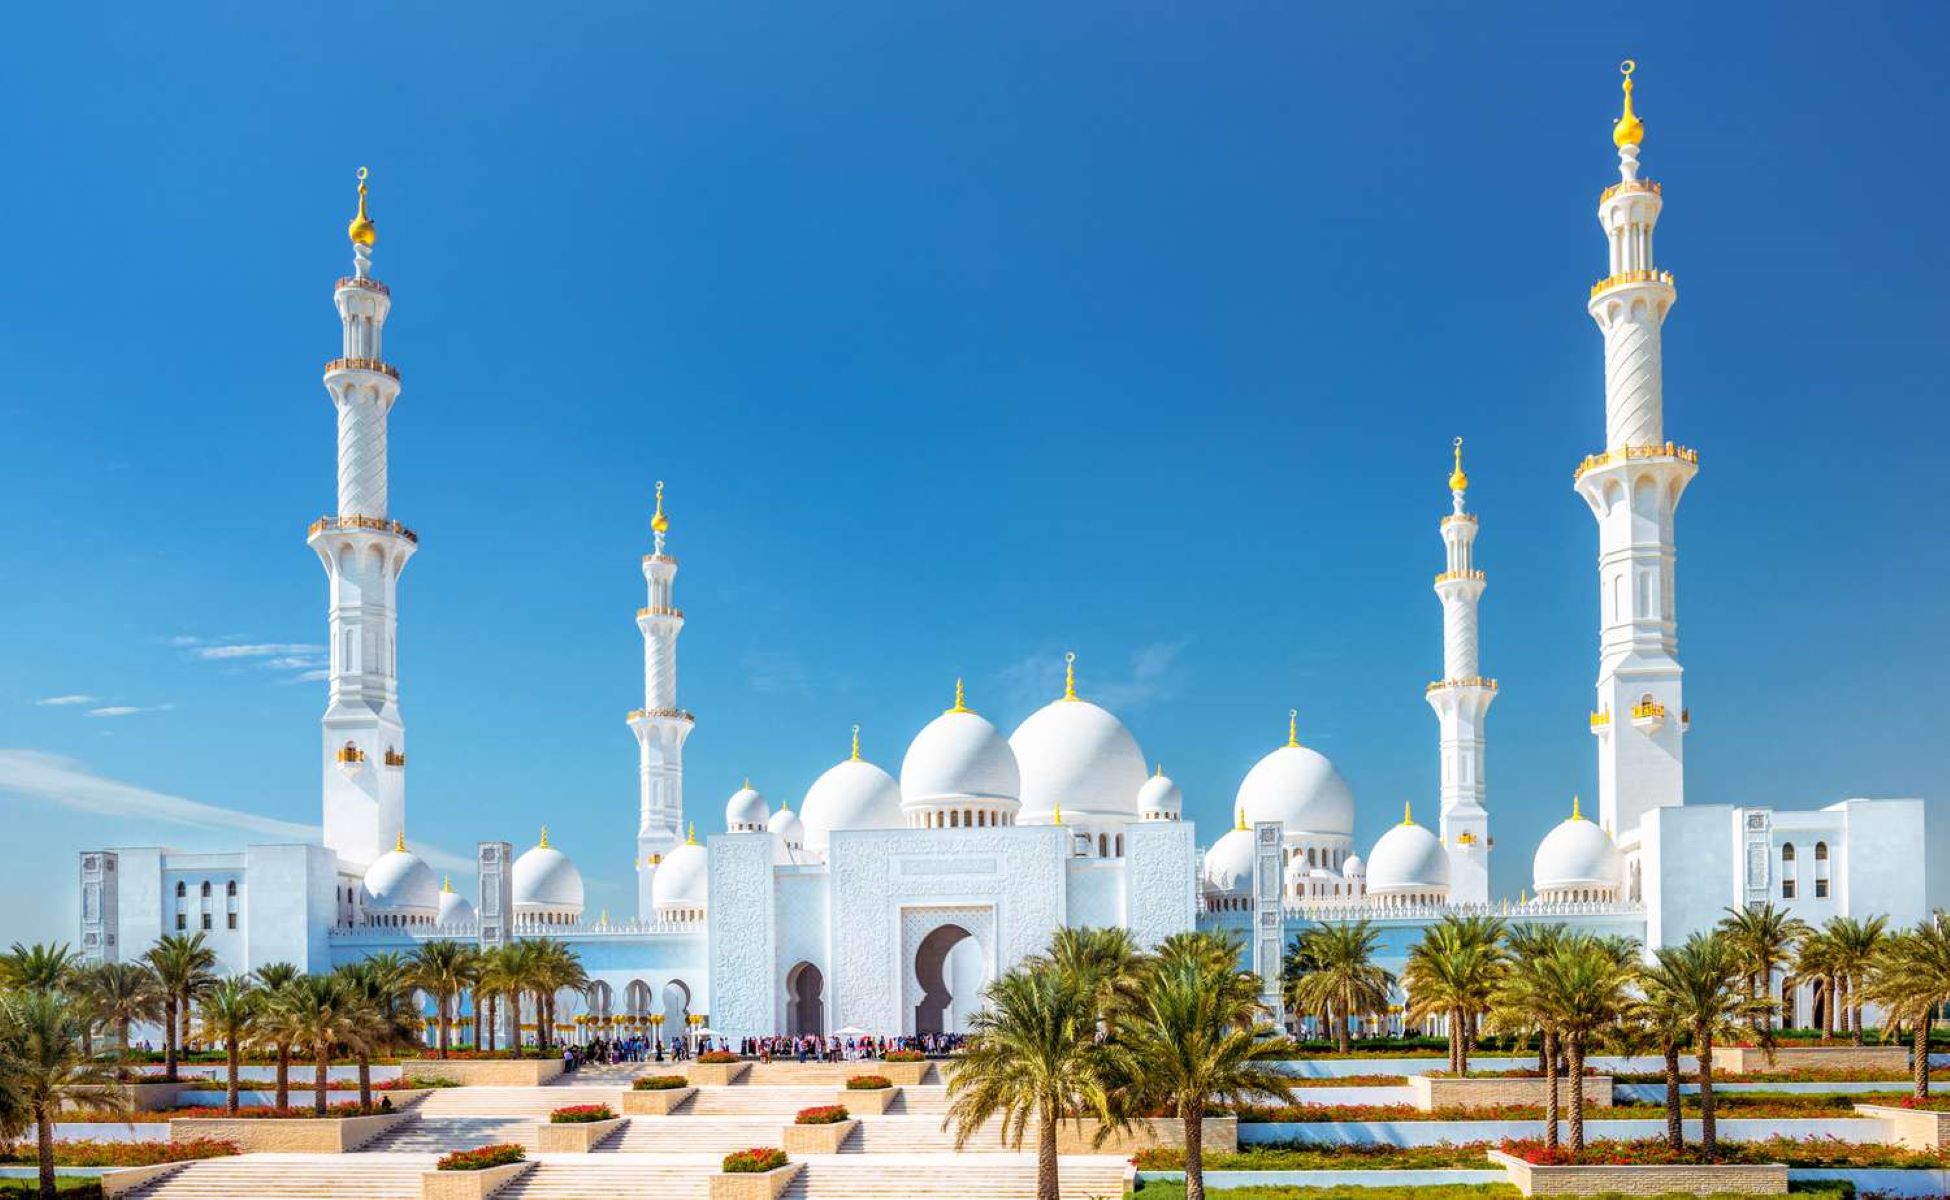 16 Intriguing Facts About Sheikh Zayed Grand Mosque - Facts.net